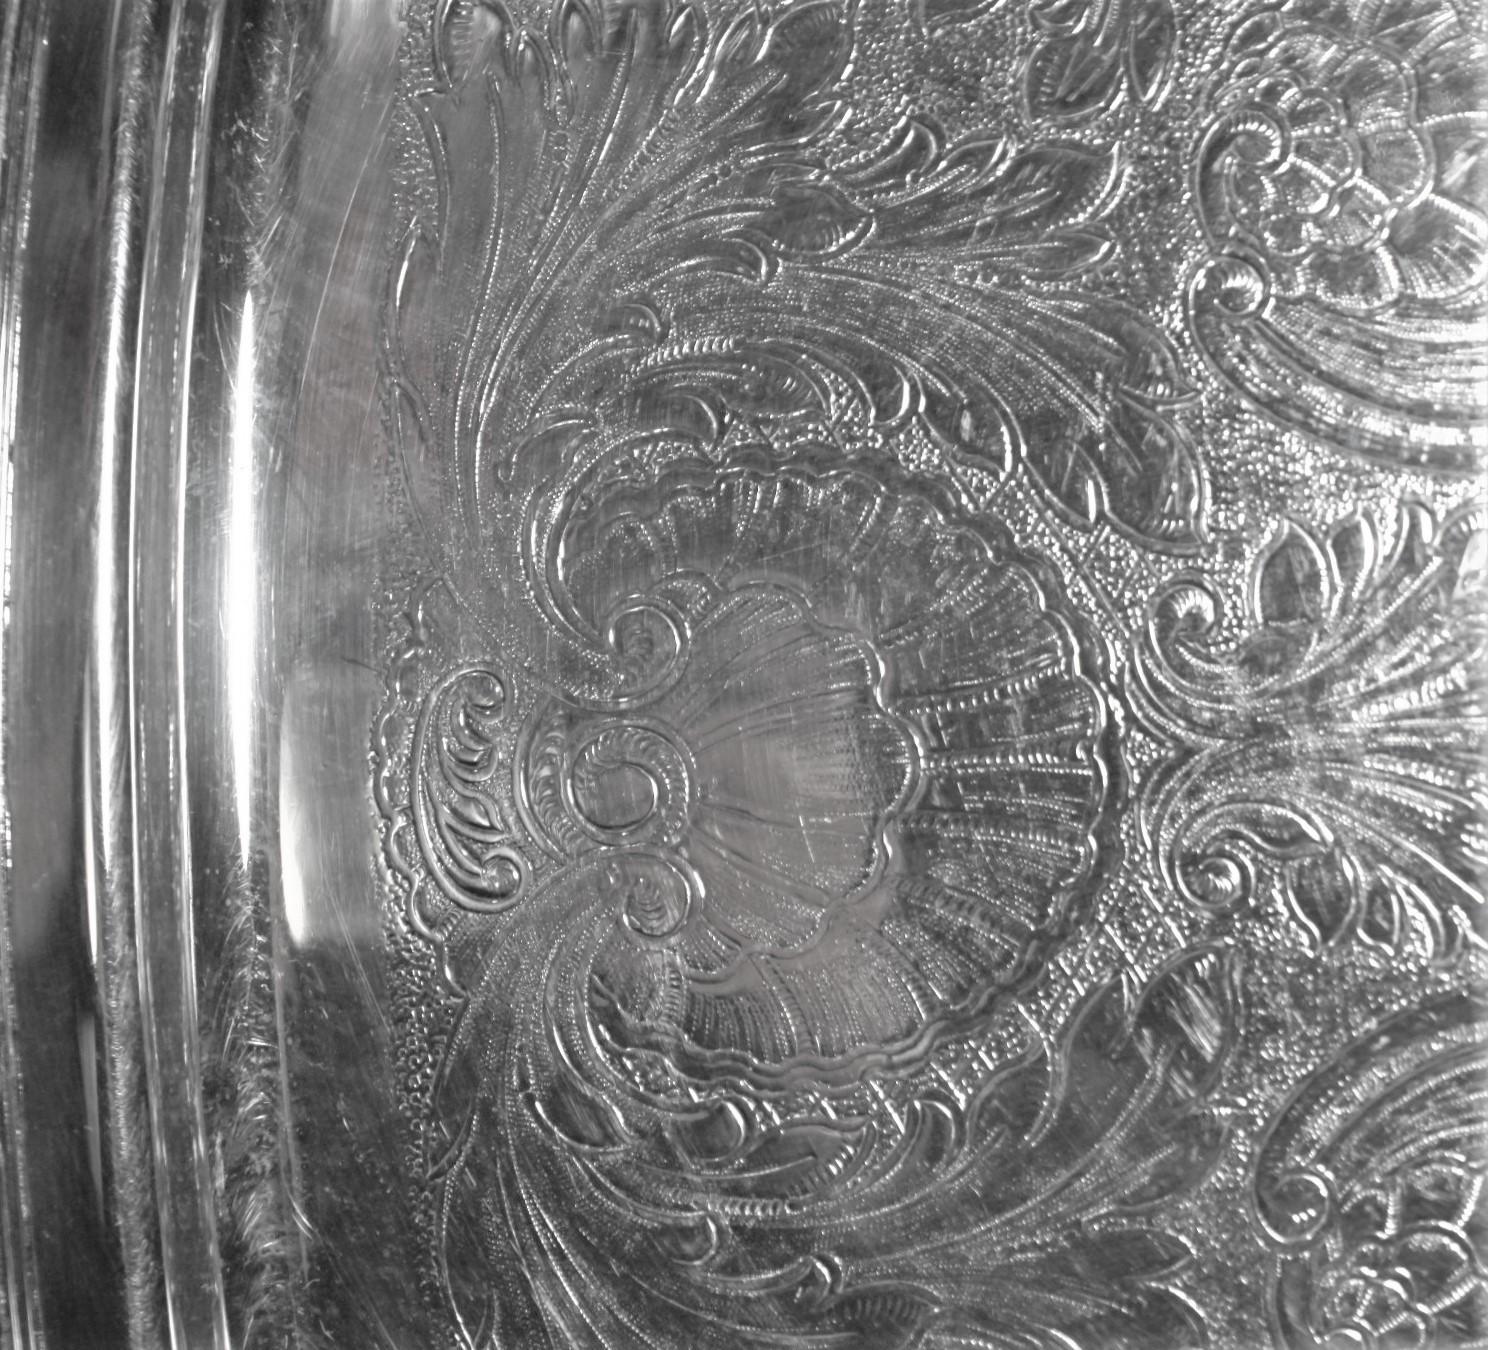 Rogers Antique Styled Silver Plated Engraved Serving Tray In Good Condition For Sale In Hamilton, Ontario